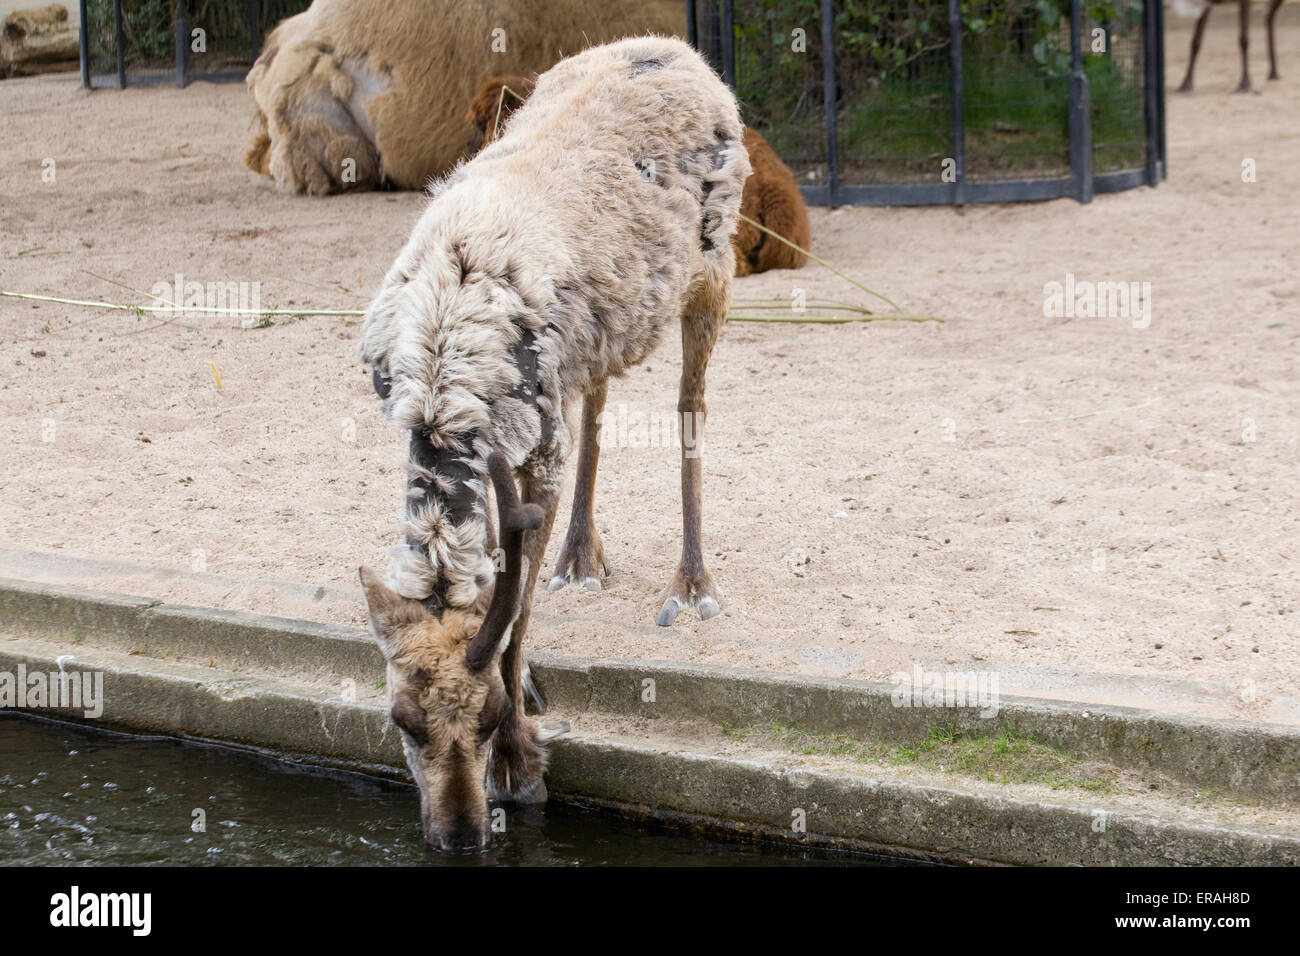 Reindeer with an Antler missing and Malting drinking water in Captivity Stock Photo